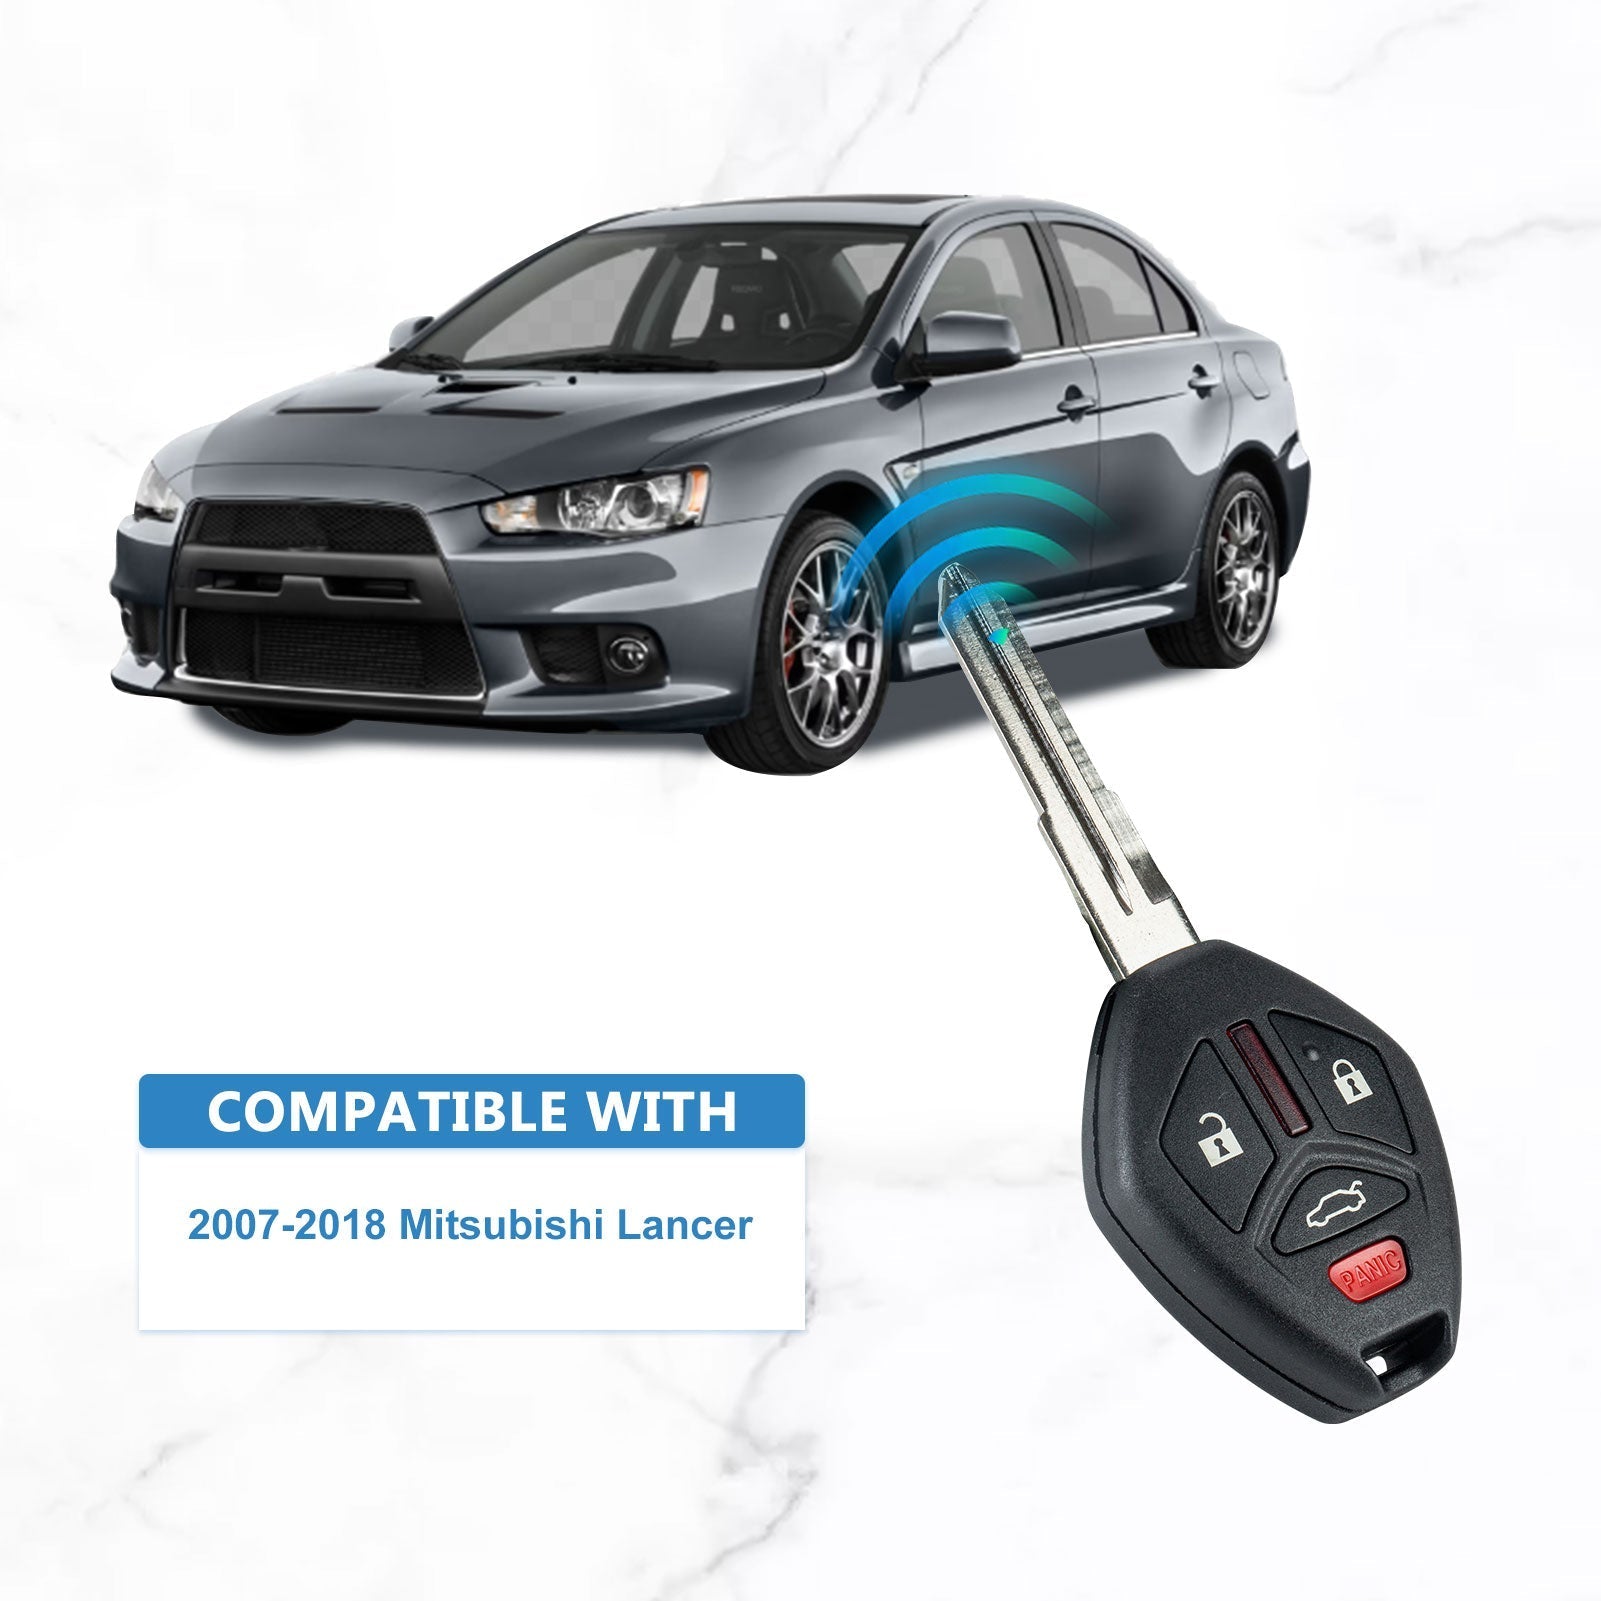 315MHz Car Key Fob Keyless Entry Control Replacement for 2007-2018 Mitsubishi Lancer OUCG8D-625M-A  KR-M4SD-10